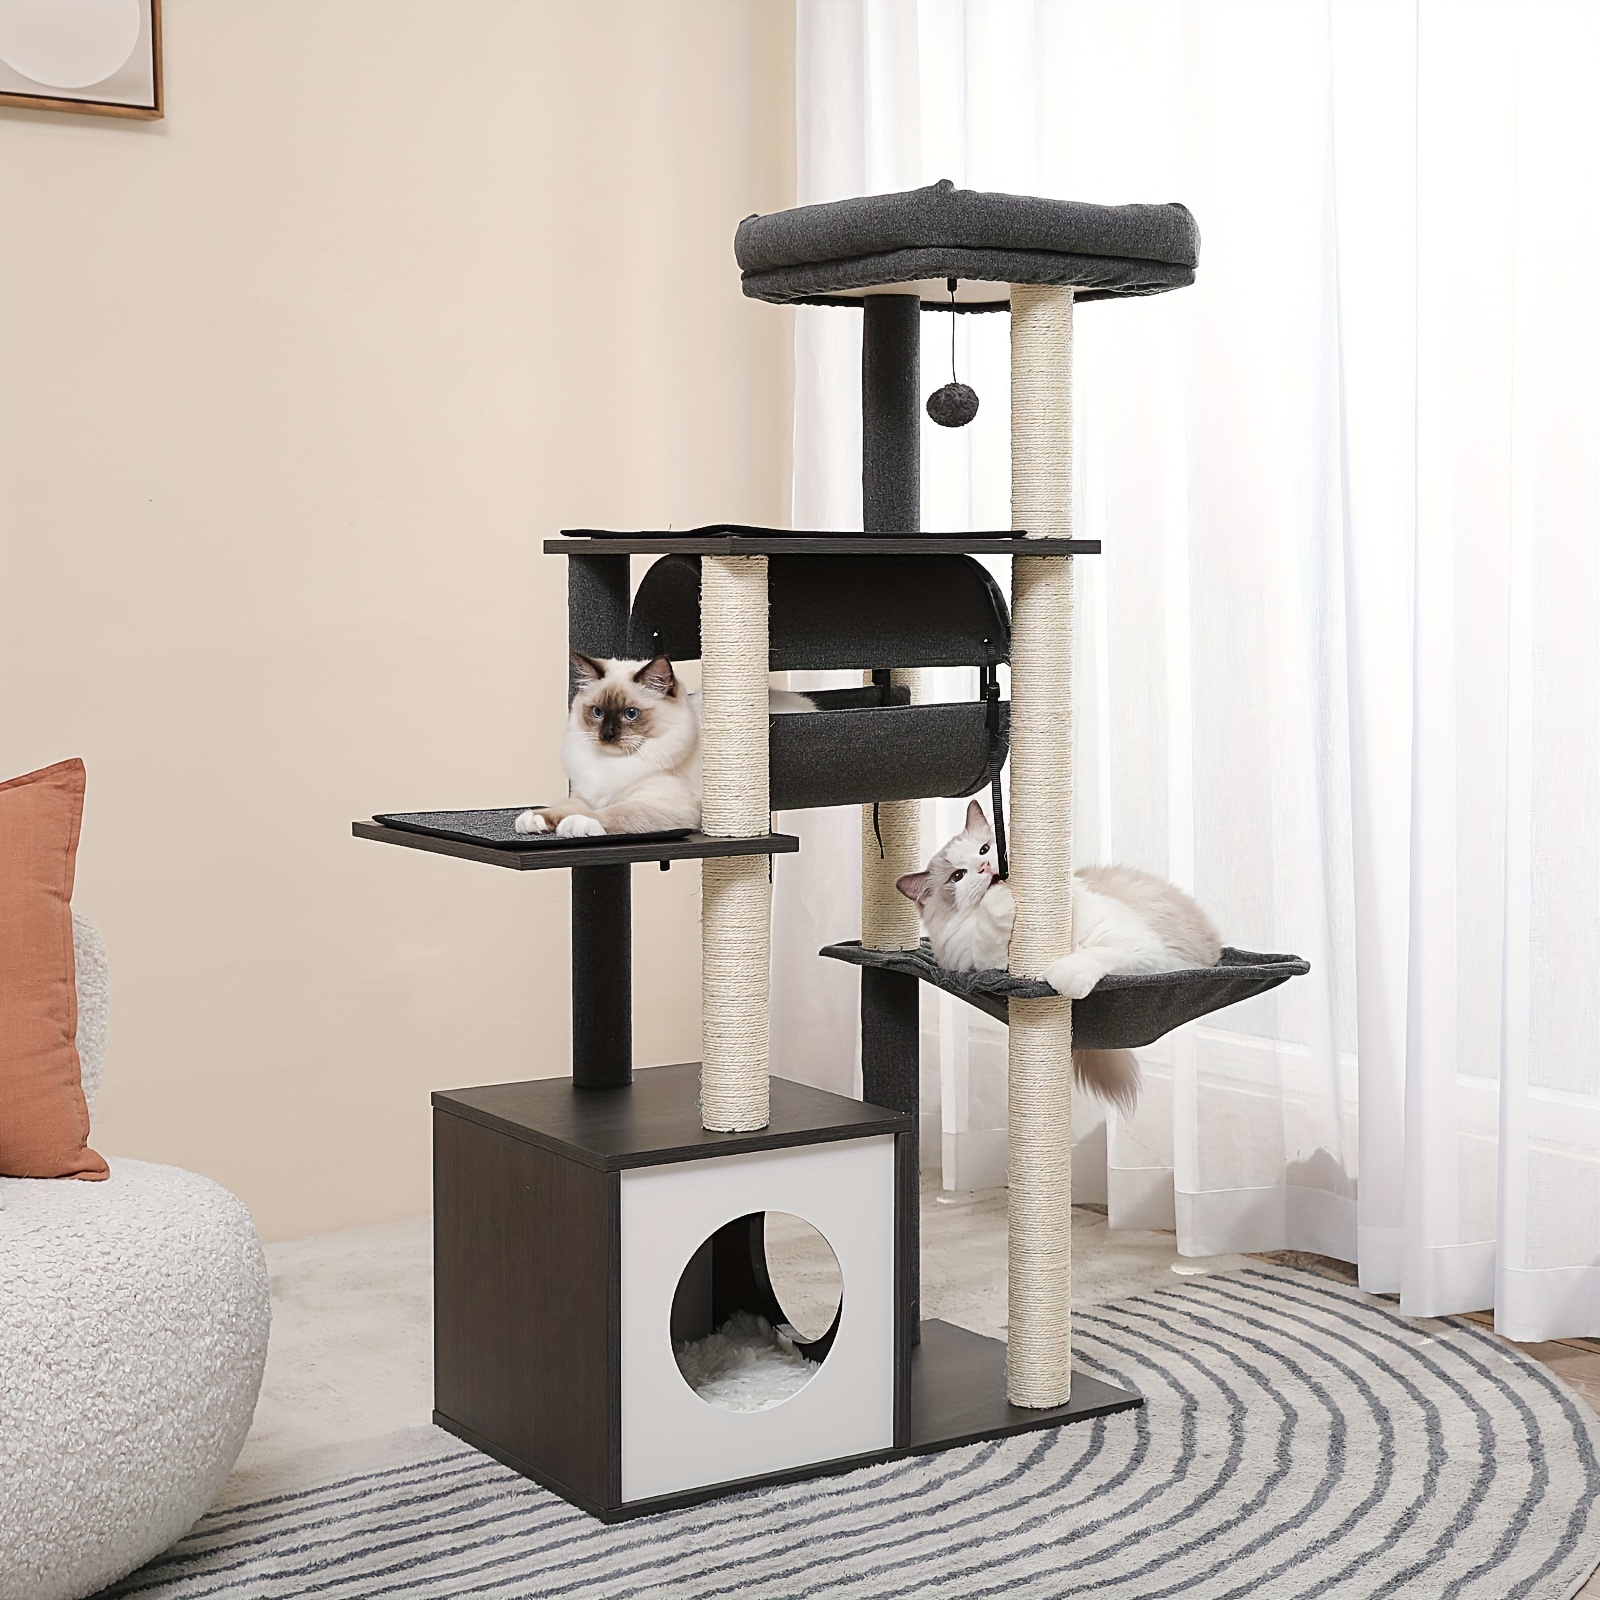 

Modern Cat Tree Premium 6 Levels 51.4 Inches Wooden Cat Tower With Fully Sisal Covered Scratching Posts, Cozy Condo, Spacious Perch, Super Large Hammock And Swing Tunnel For Indoor Cats